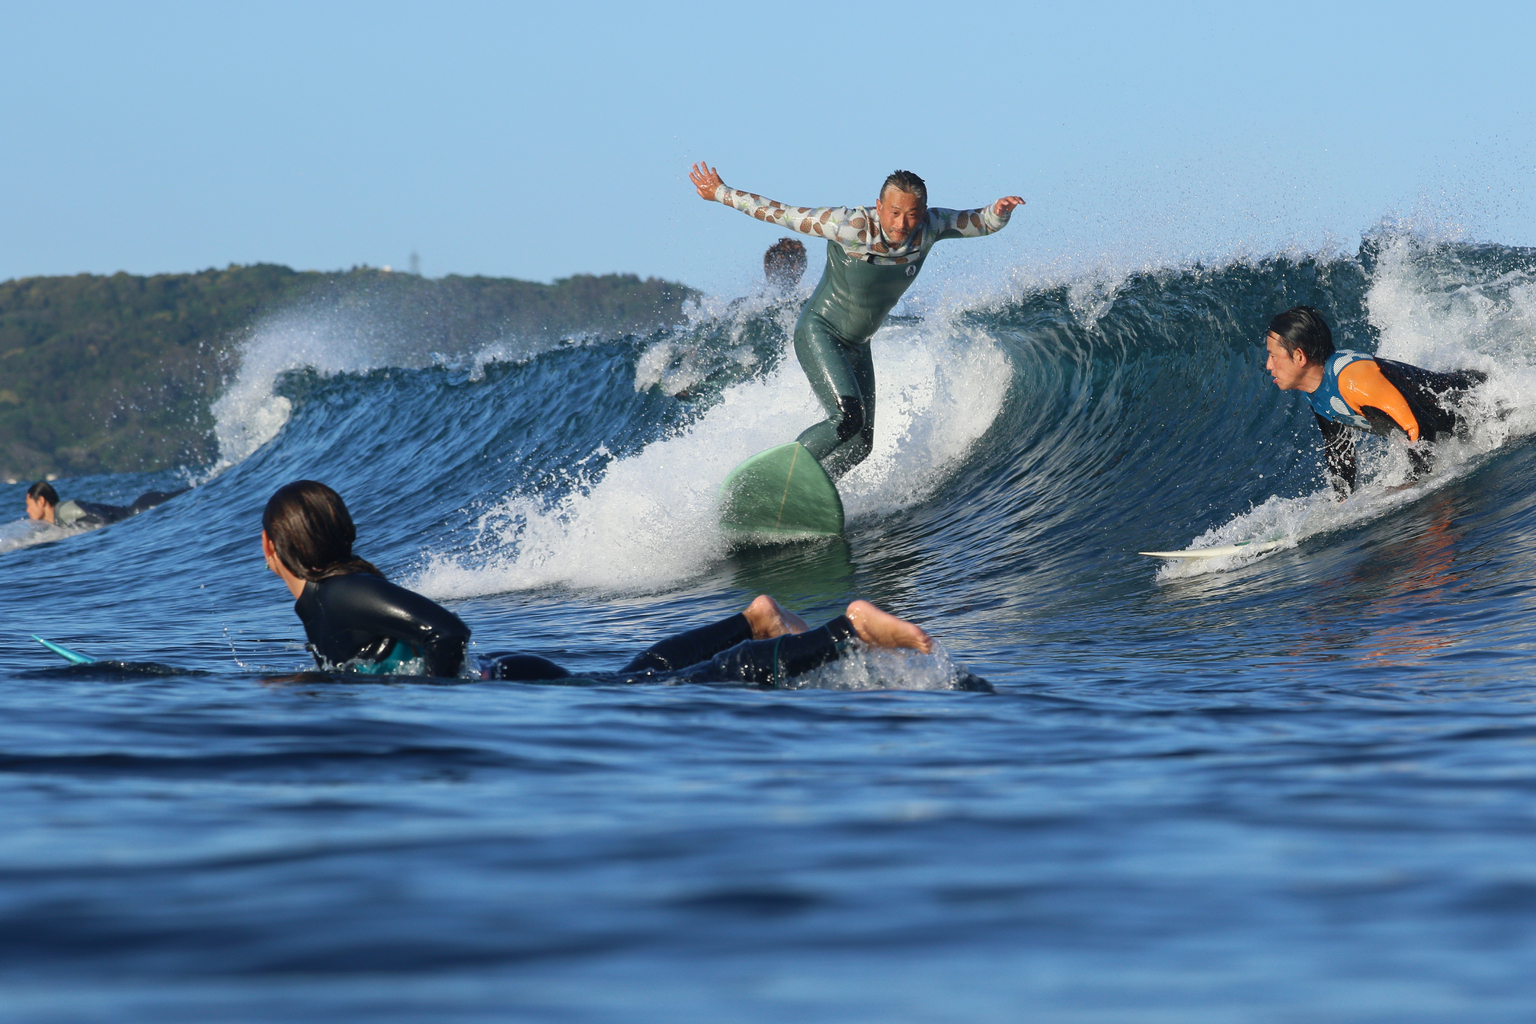 Surfing in Japan: How (And Where) to Get Started